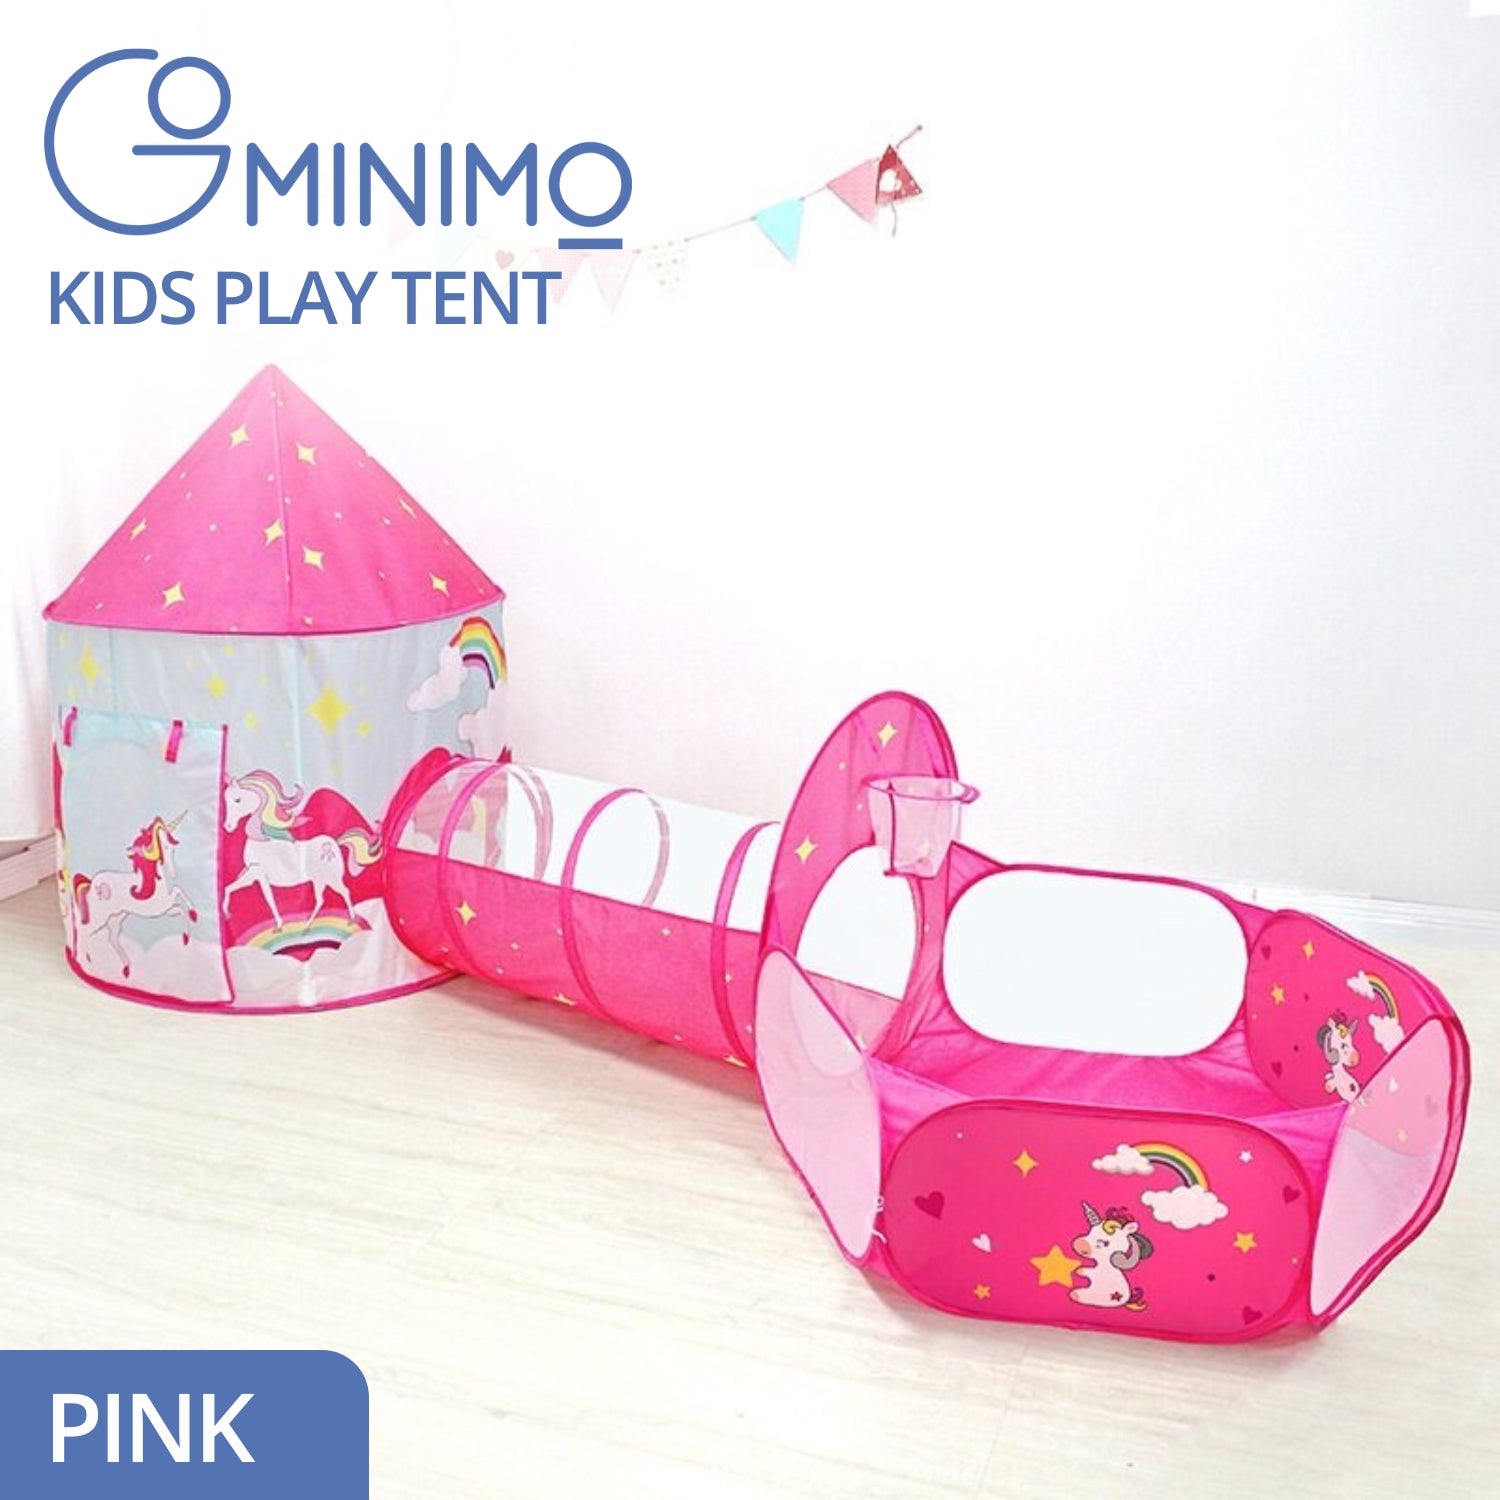 GOMINIMO 3 in 1 Unicorn Style Kids Play Tent (Pink) GO-KT-112-LK - SILBERSHELL